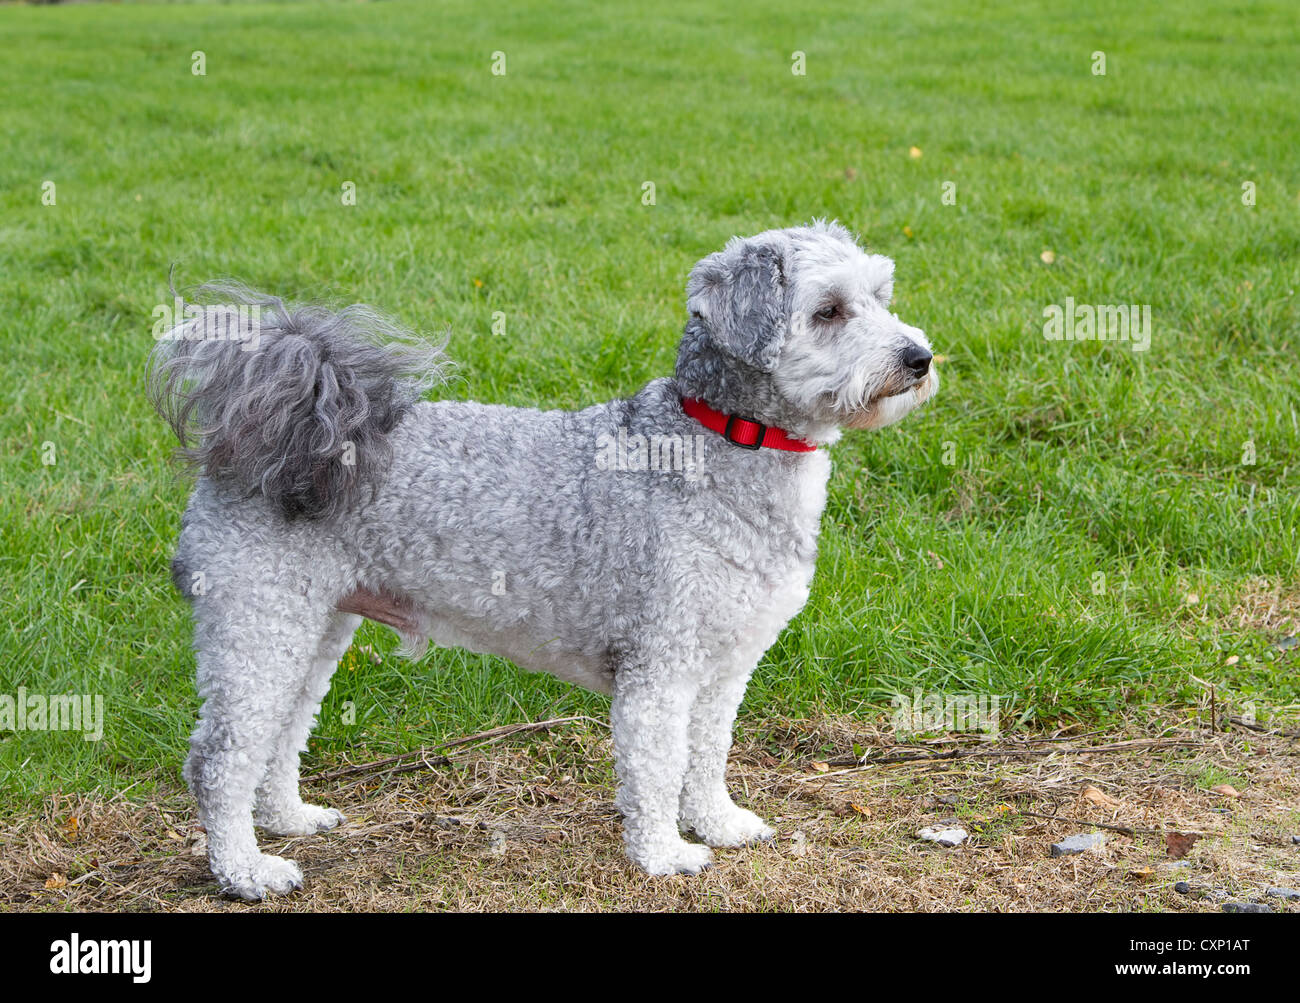 Bichon frise poodle standing looking Stock Photo - Alamy